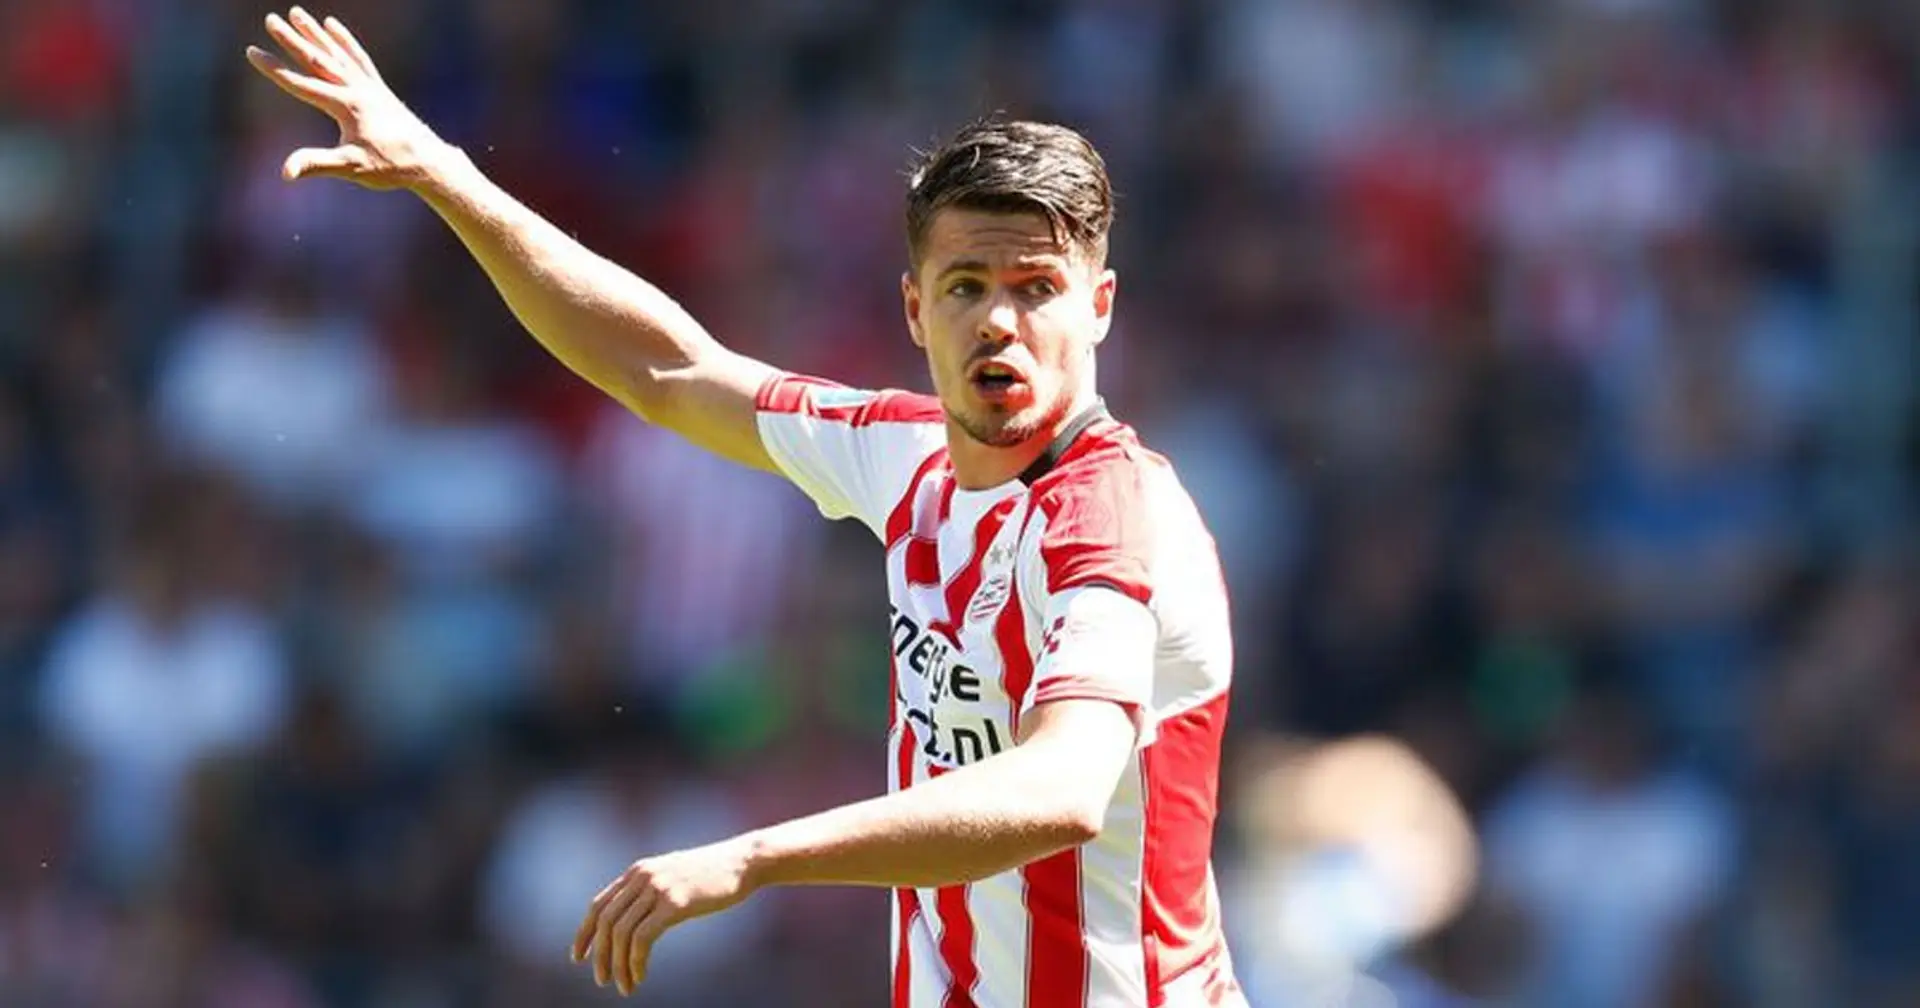 'I have no idea what is going to happen': forgotten Chelsea star Marco van Ginkel unsure of his future at Stamford Bridge